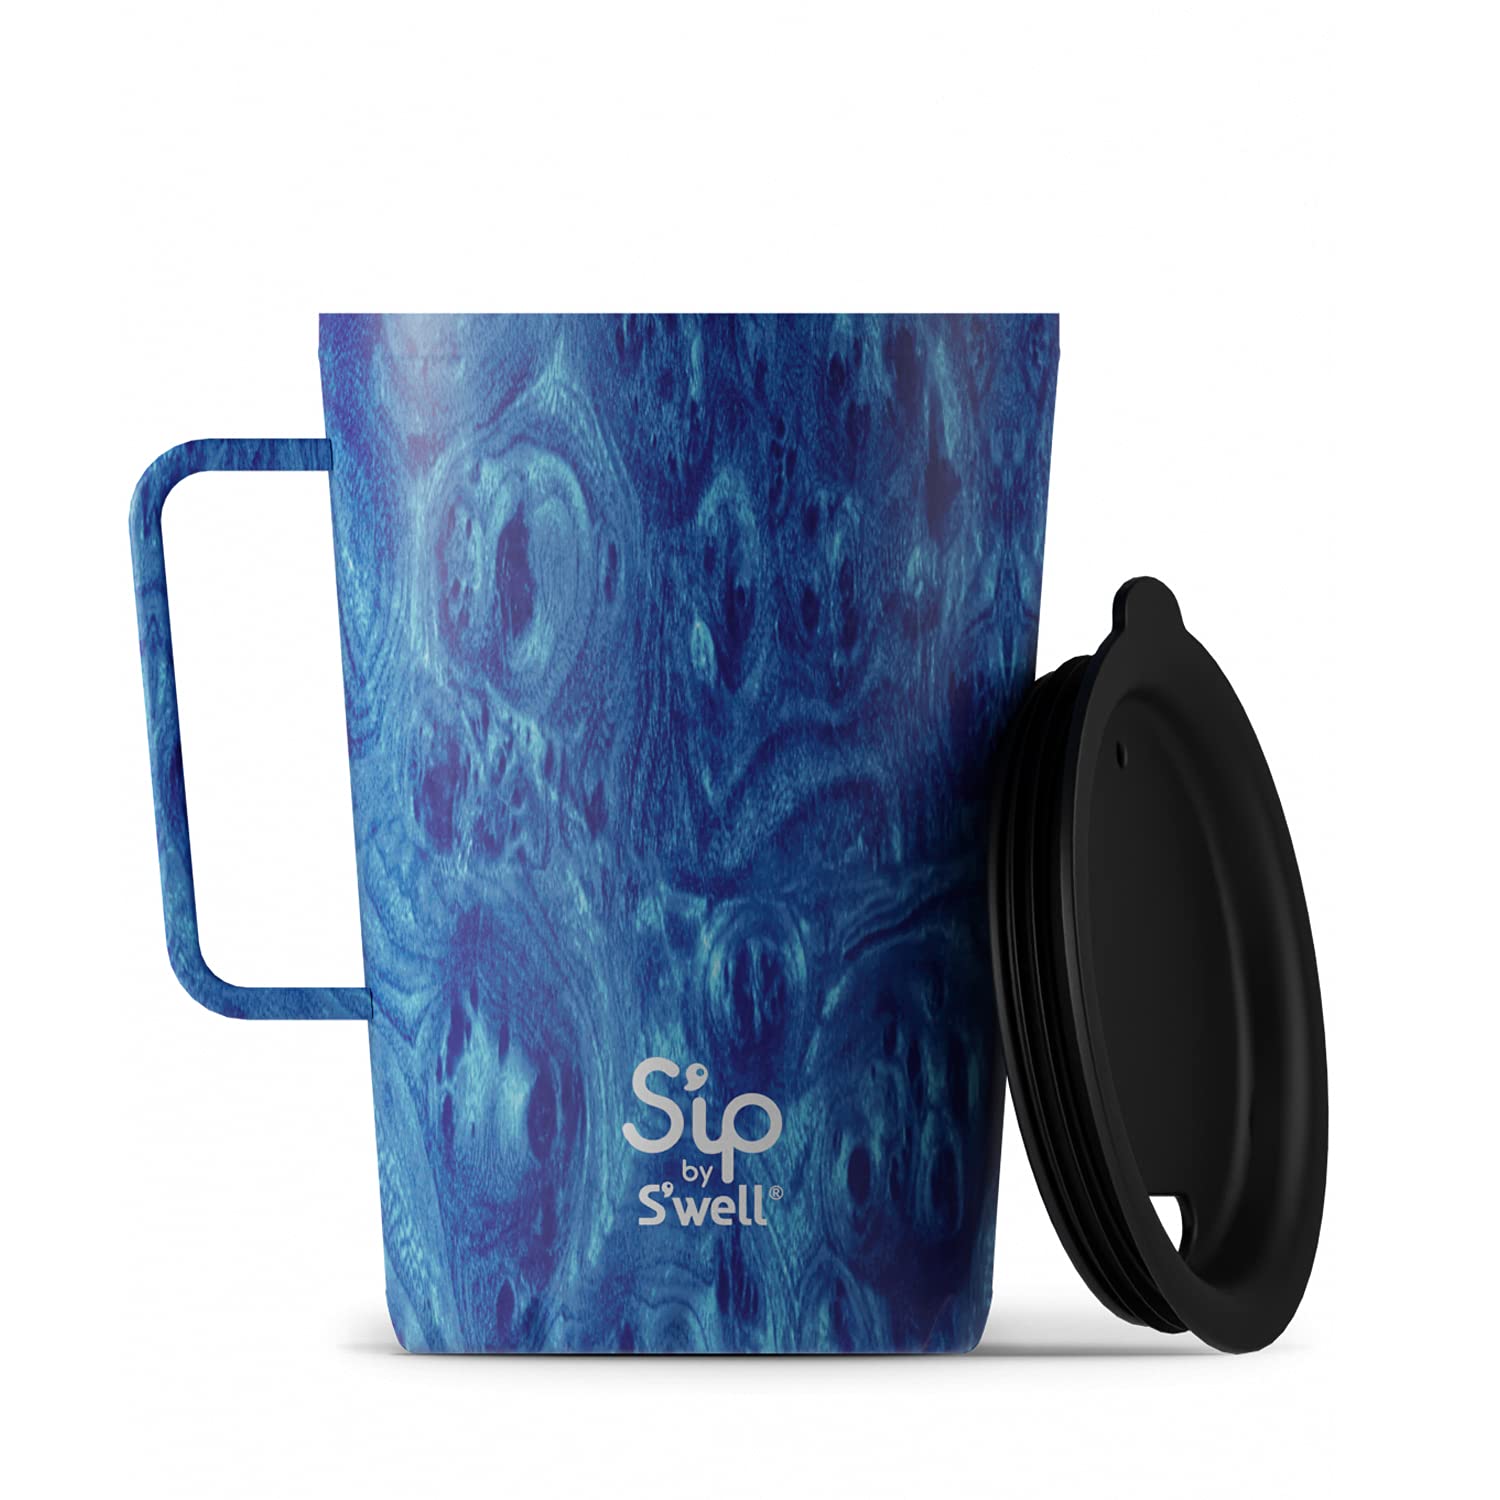 S'well S'ip Stainless Steel Takeaway Tumbler - 15 Oz - Azure Forest - Double-Walled Vacuum-Insulated Keeps Drinks Cold for 10 Hours and Hot for 2 - with No Condensation - BPA-Free Travel Mug